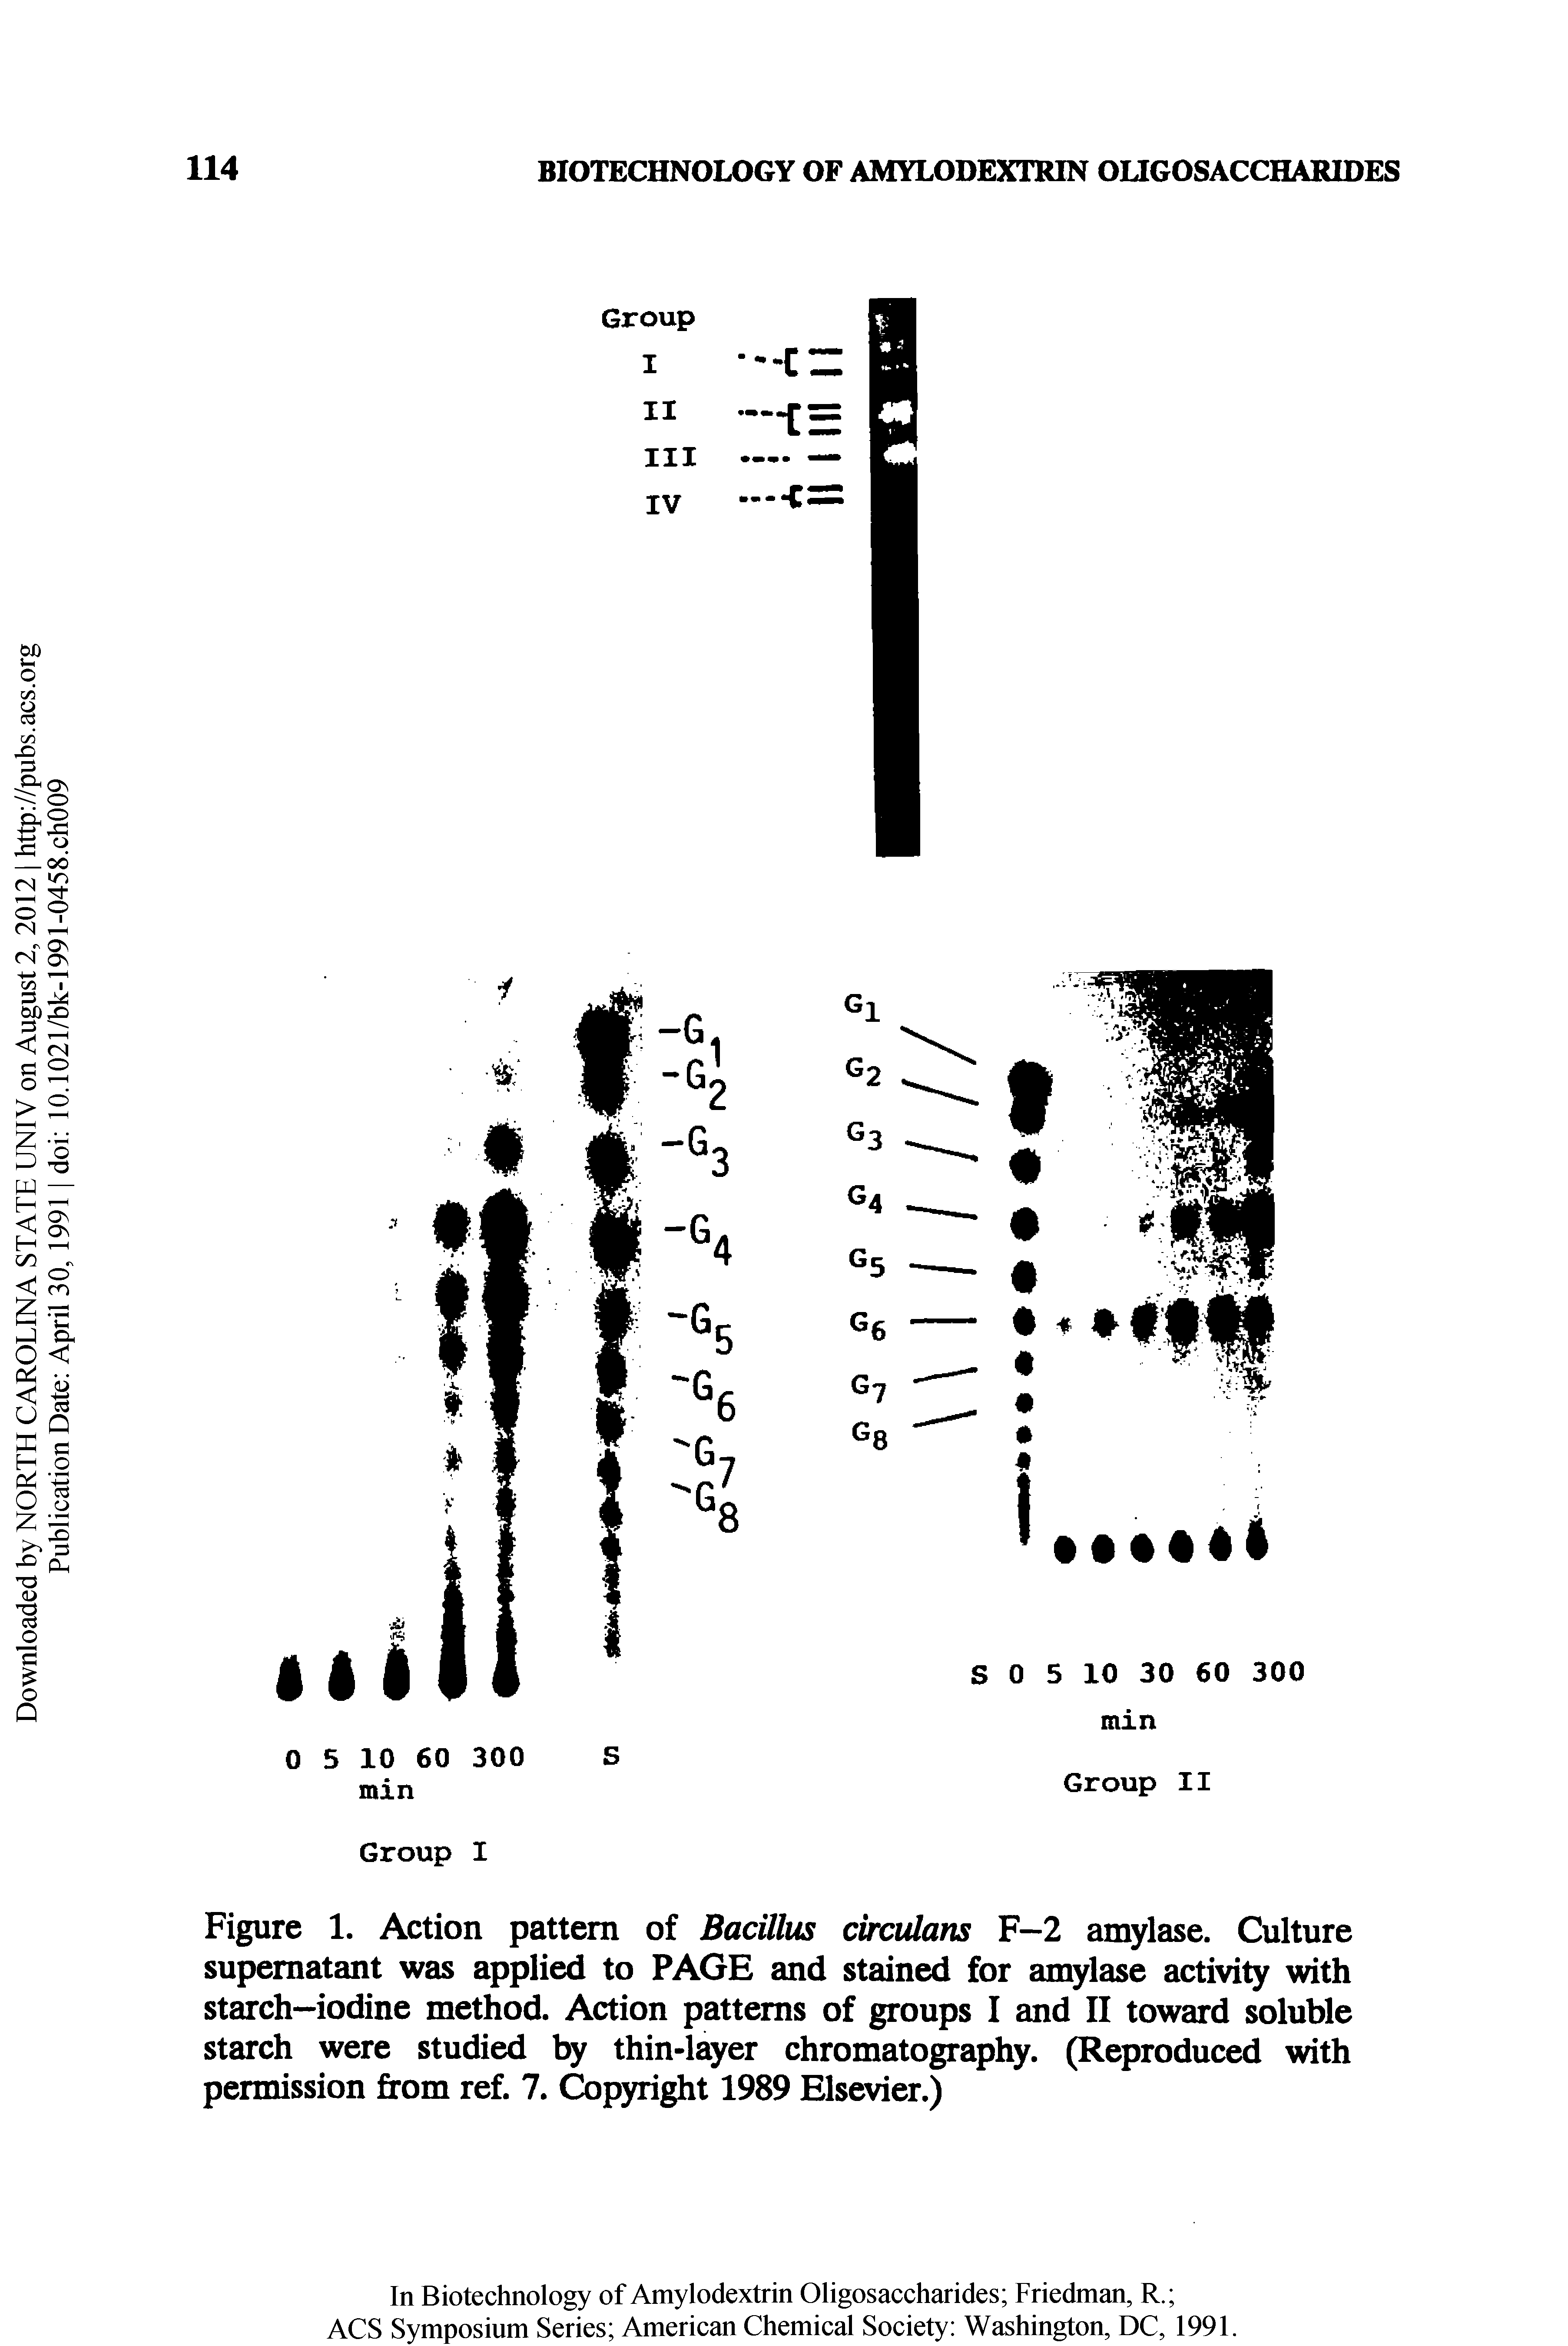 Figure 1. Action pattern of Bacillus circulans F-2 amylase. Culture supernatant was applied to PAGE and stained for amylase activity with starch—iodine method. Action patterns of groups I and II toward soluble starch were studied thin-layer chromatography. (Reproduced with permission from ref. 7. Cbpyright 1989 Elsevier.)...